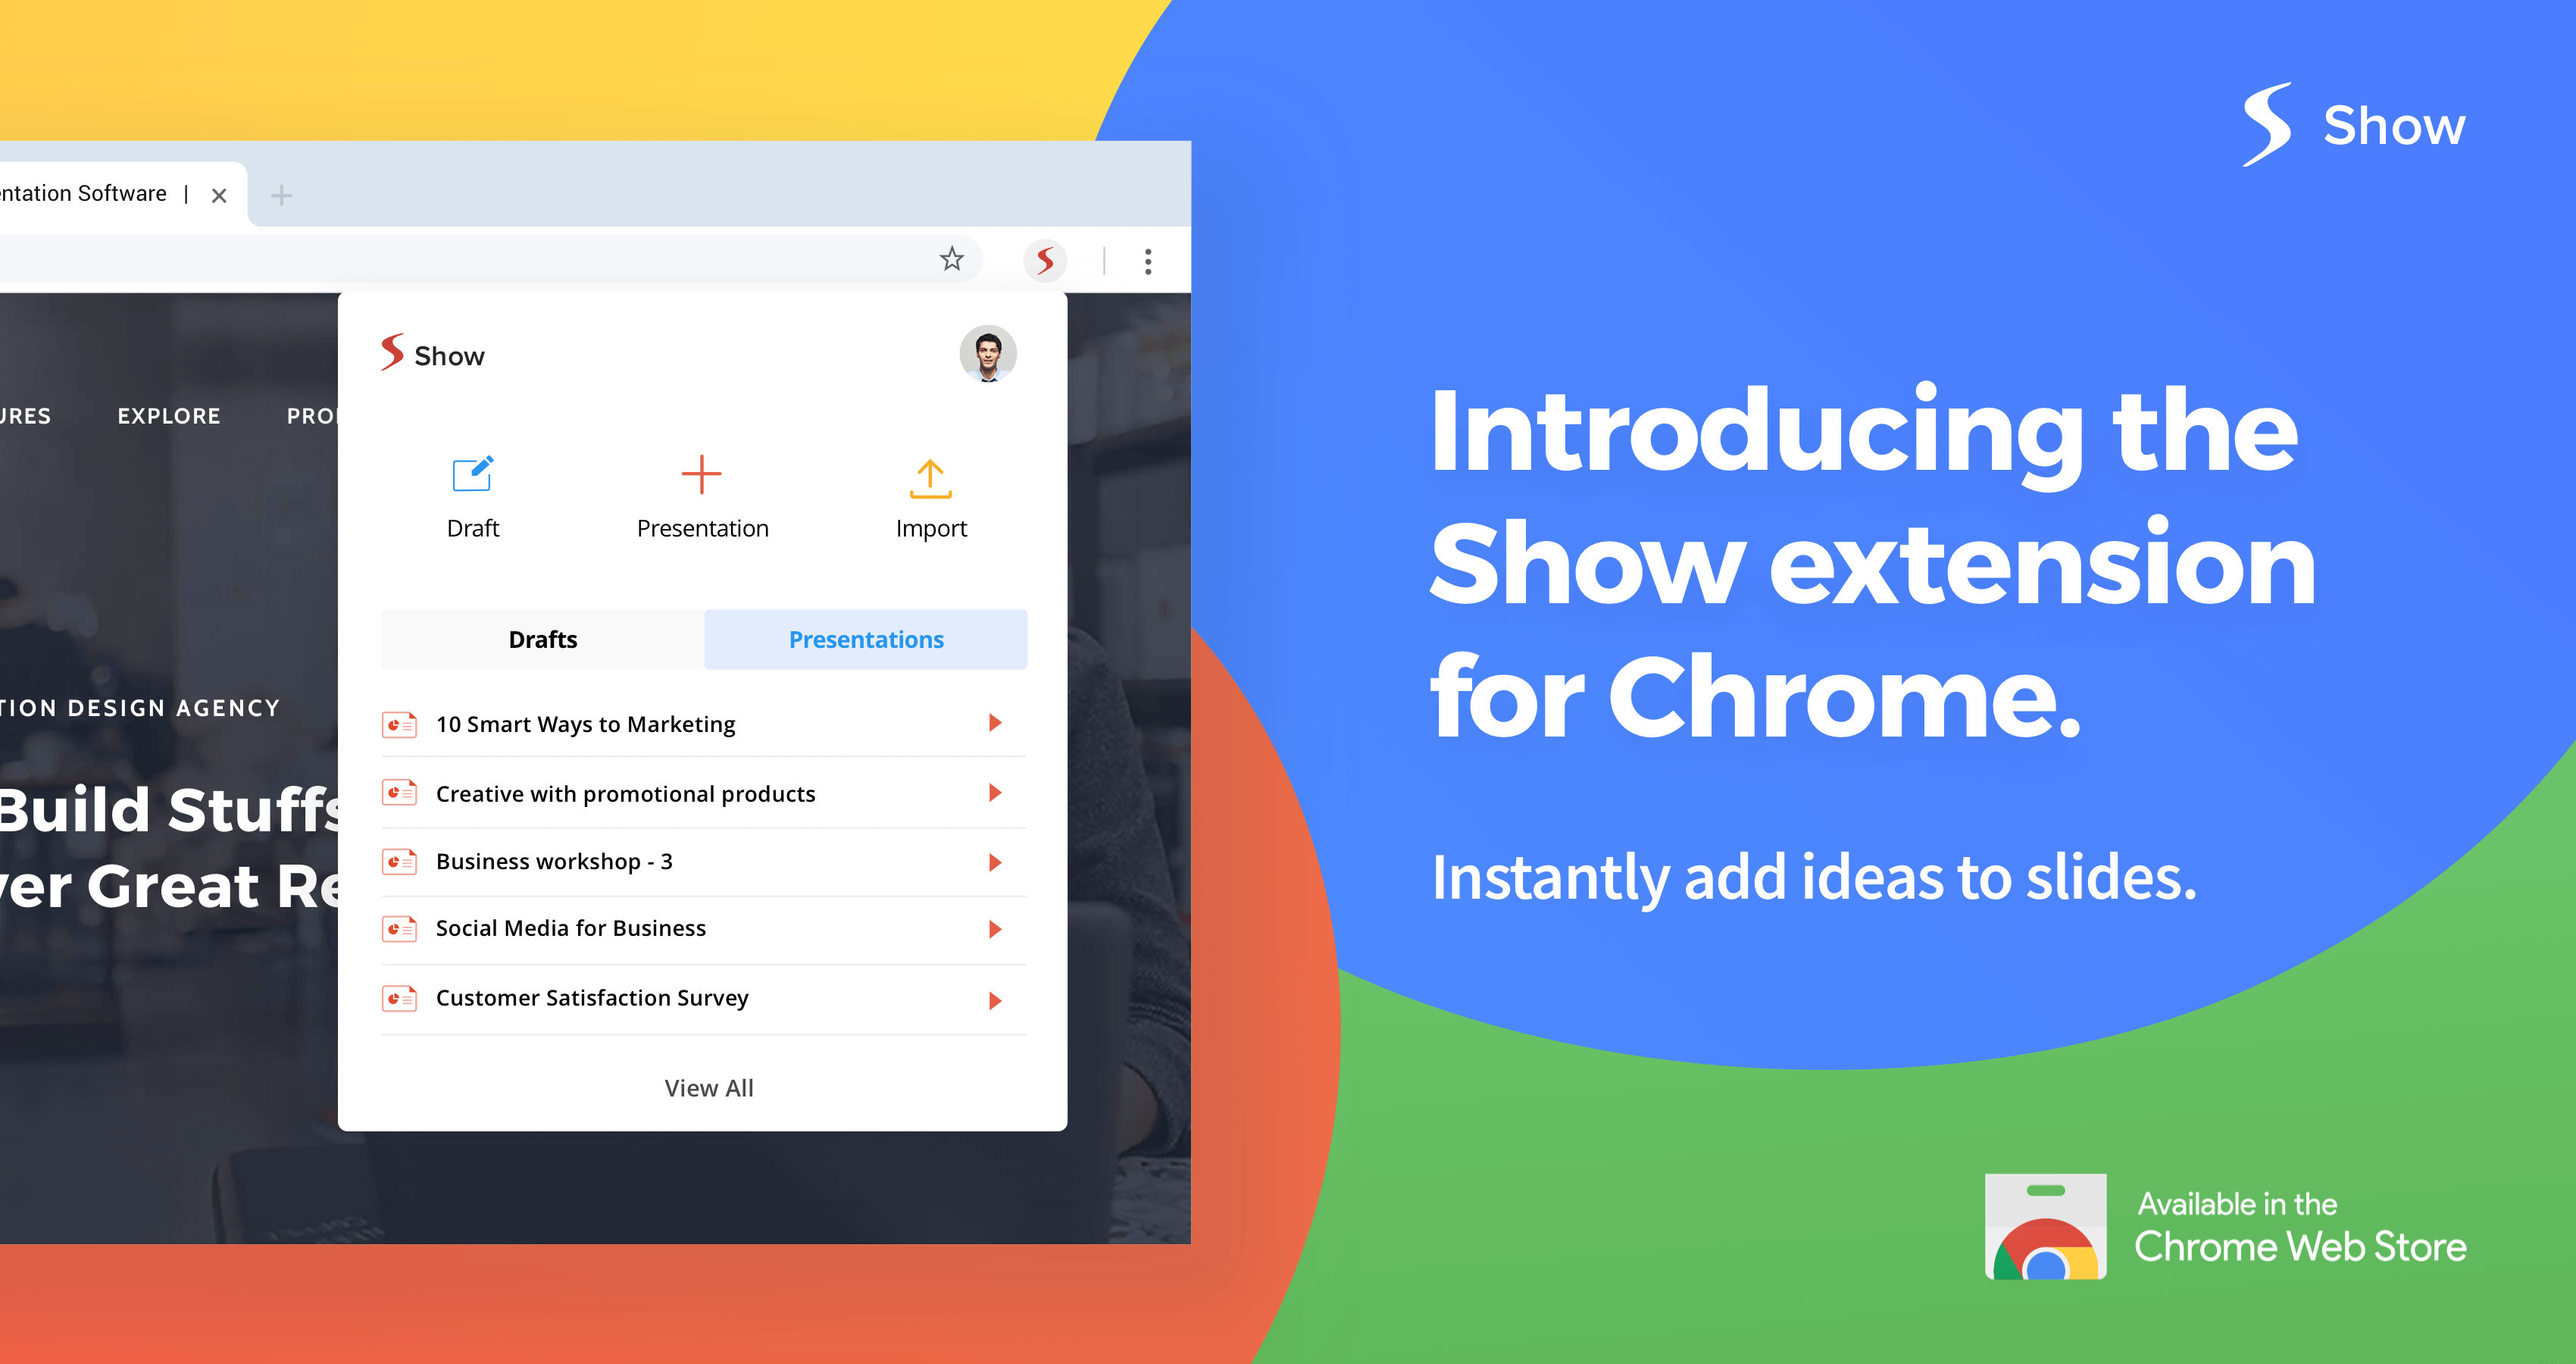 Create and edit presentations right from your browser with Zoho Show’s new Chrome extension